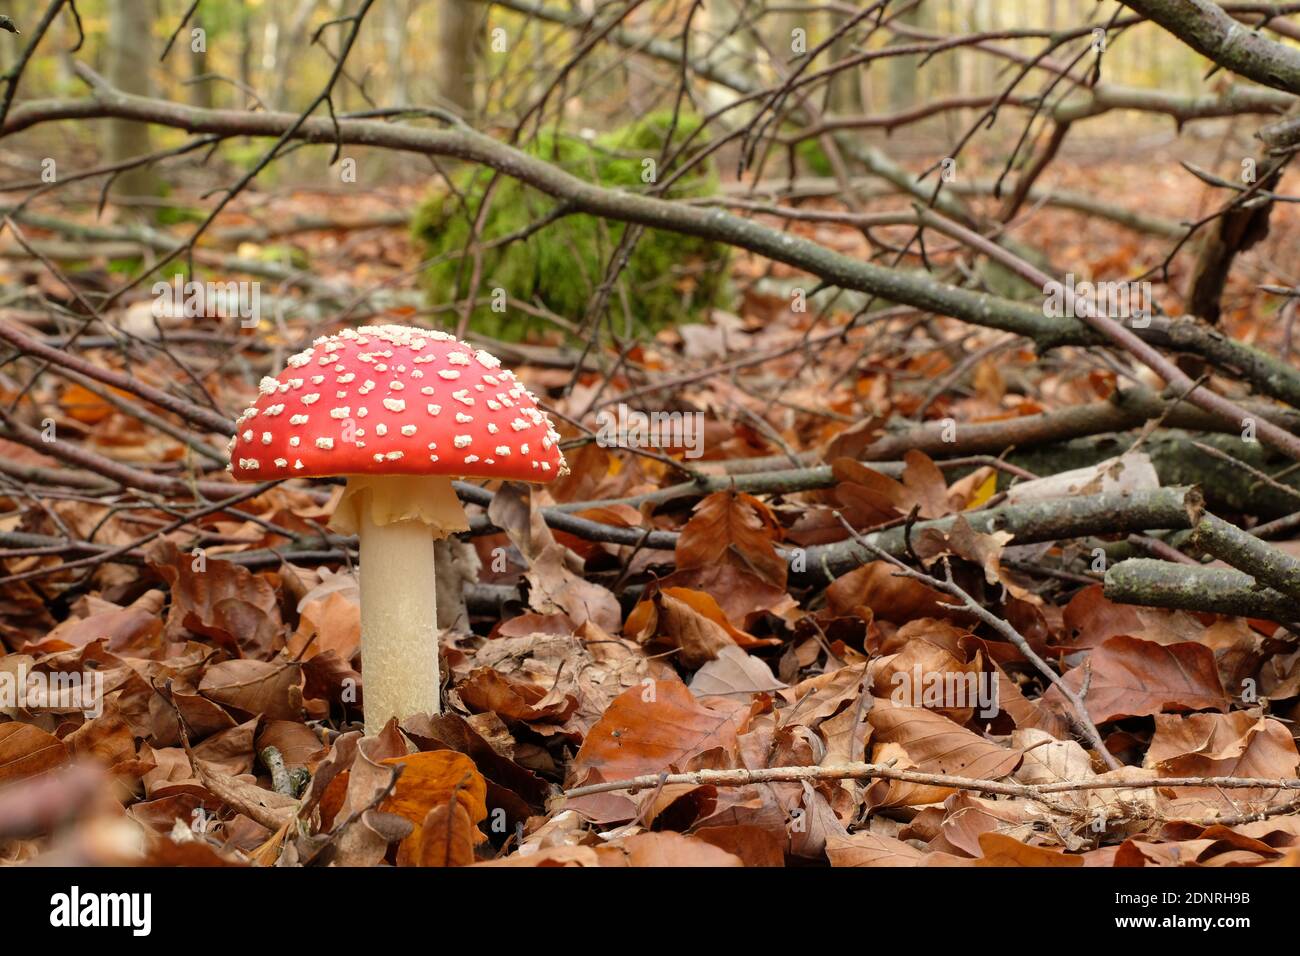 Fly Agaric Mushroom, Amanita Muscaria With Red Cap, White Spots, And White Gills. Stock Photo